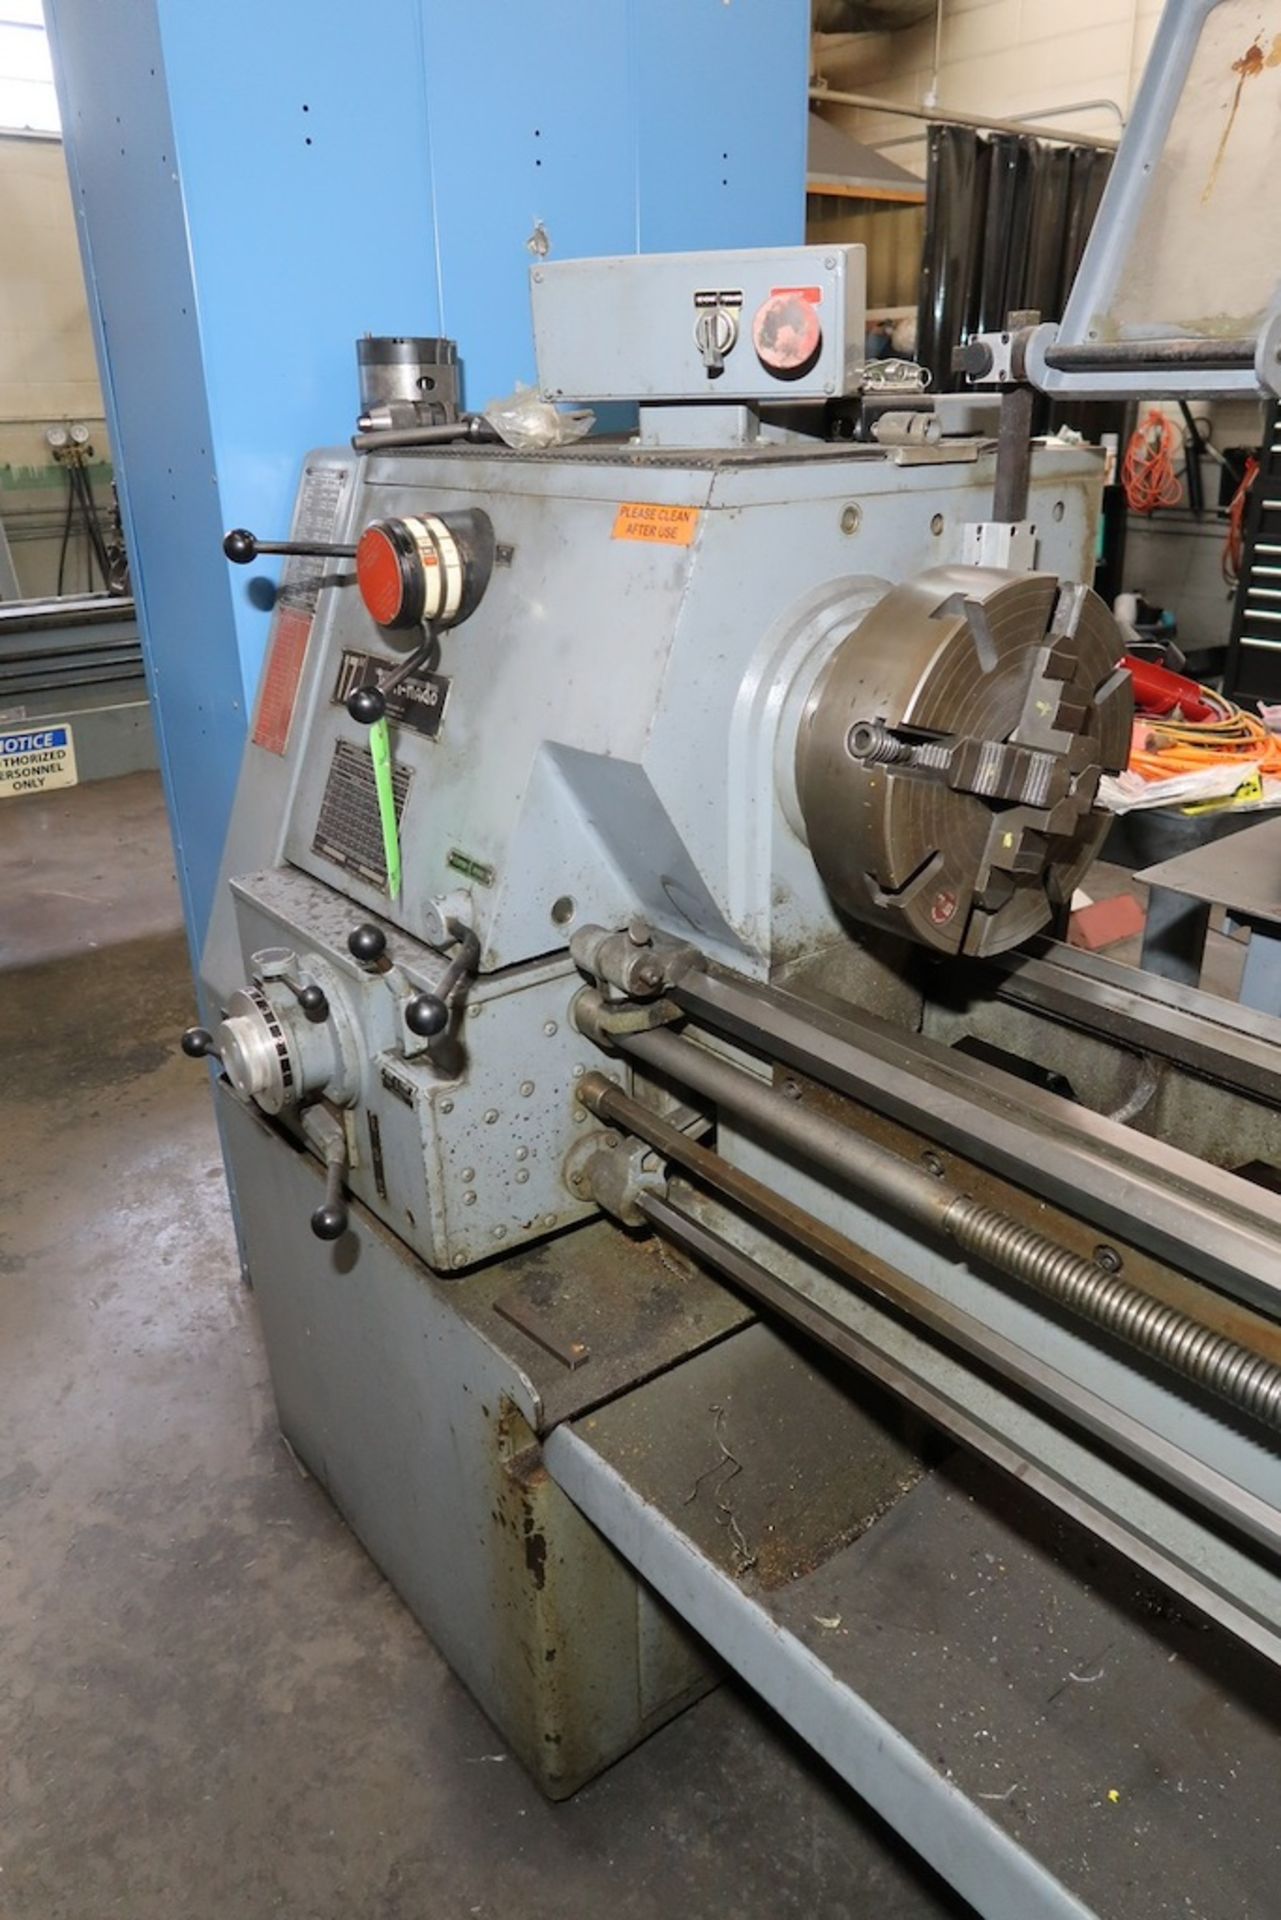 South Bend Lathe CL170G Engine Lathe, 17" Swing, 72" Between Centers - Image 2 of 3